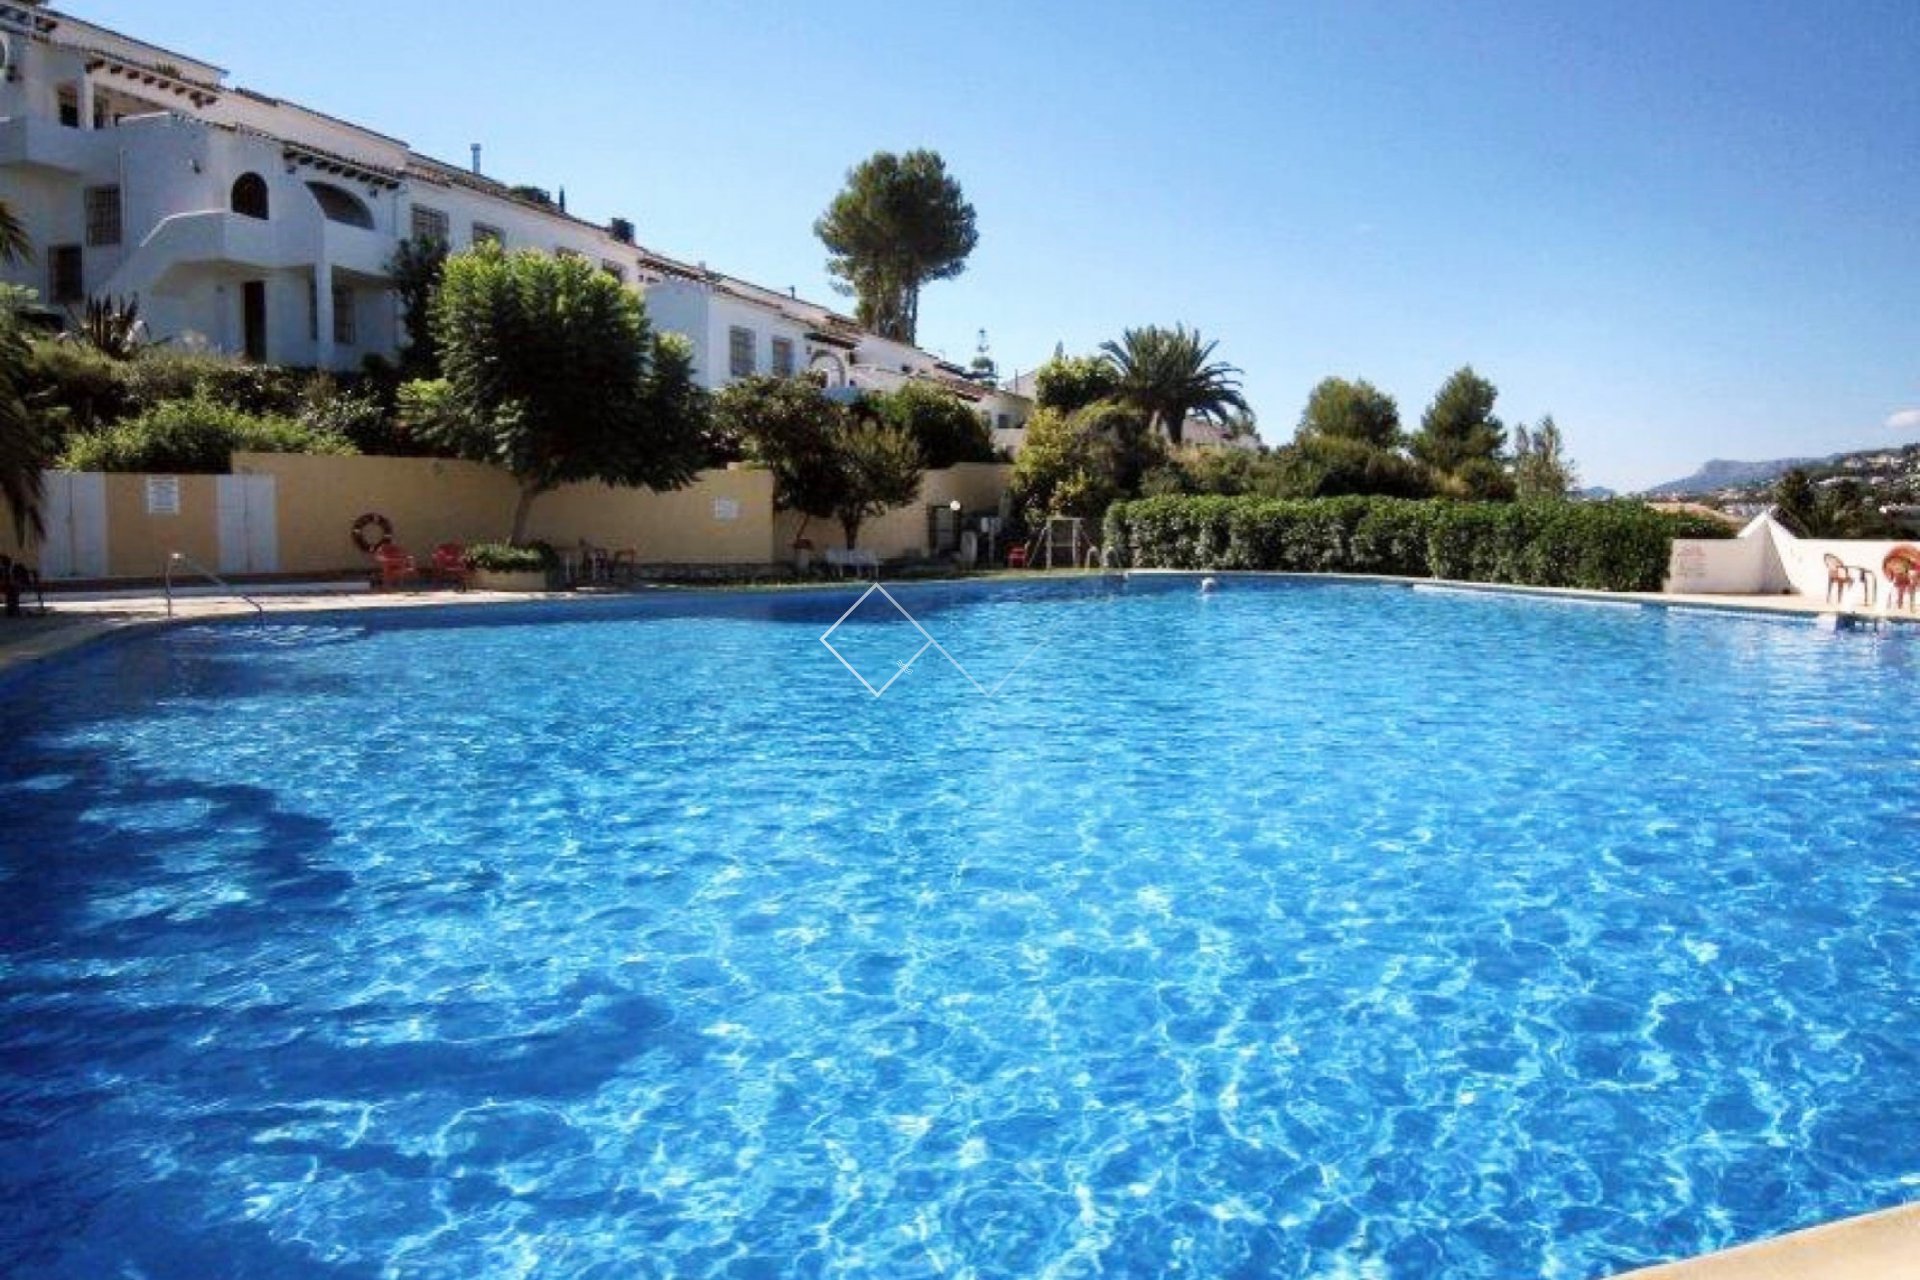 community pool - Apartment with tourist licence for sale in Villotel, Moraira